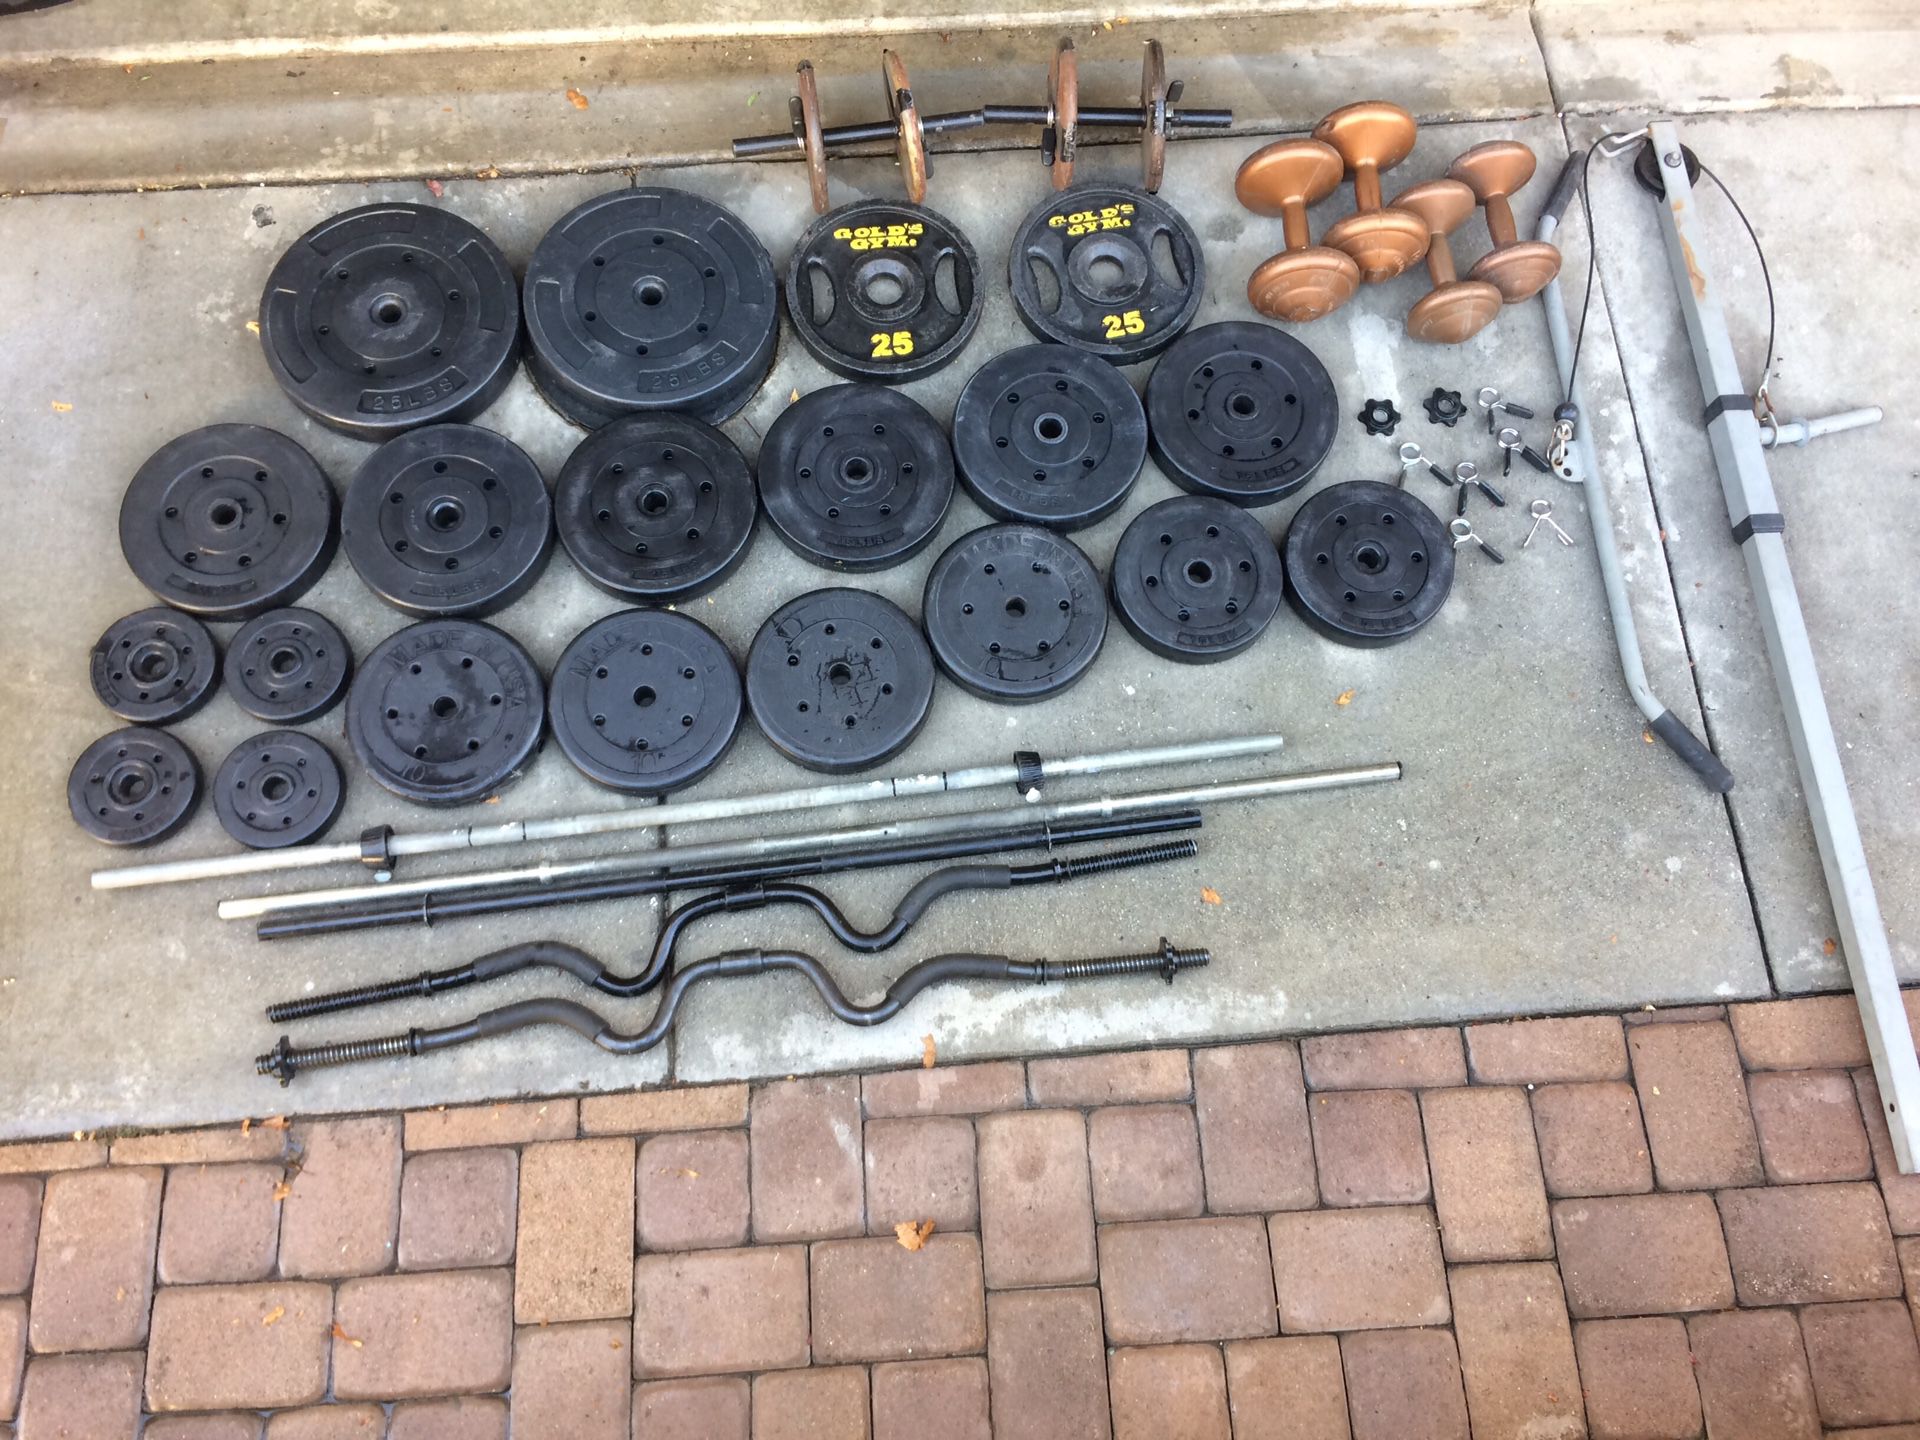 310 lbs of weight, Dumbbells, Barbells, and Pulley Pushdown Attachment